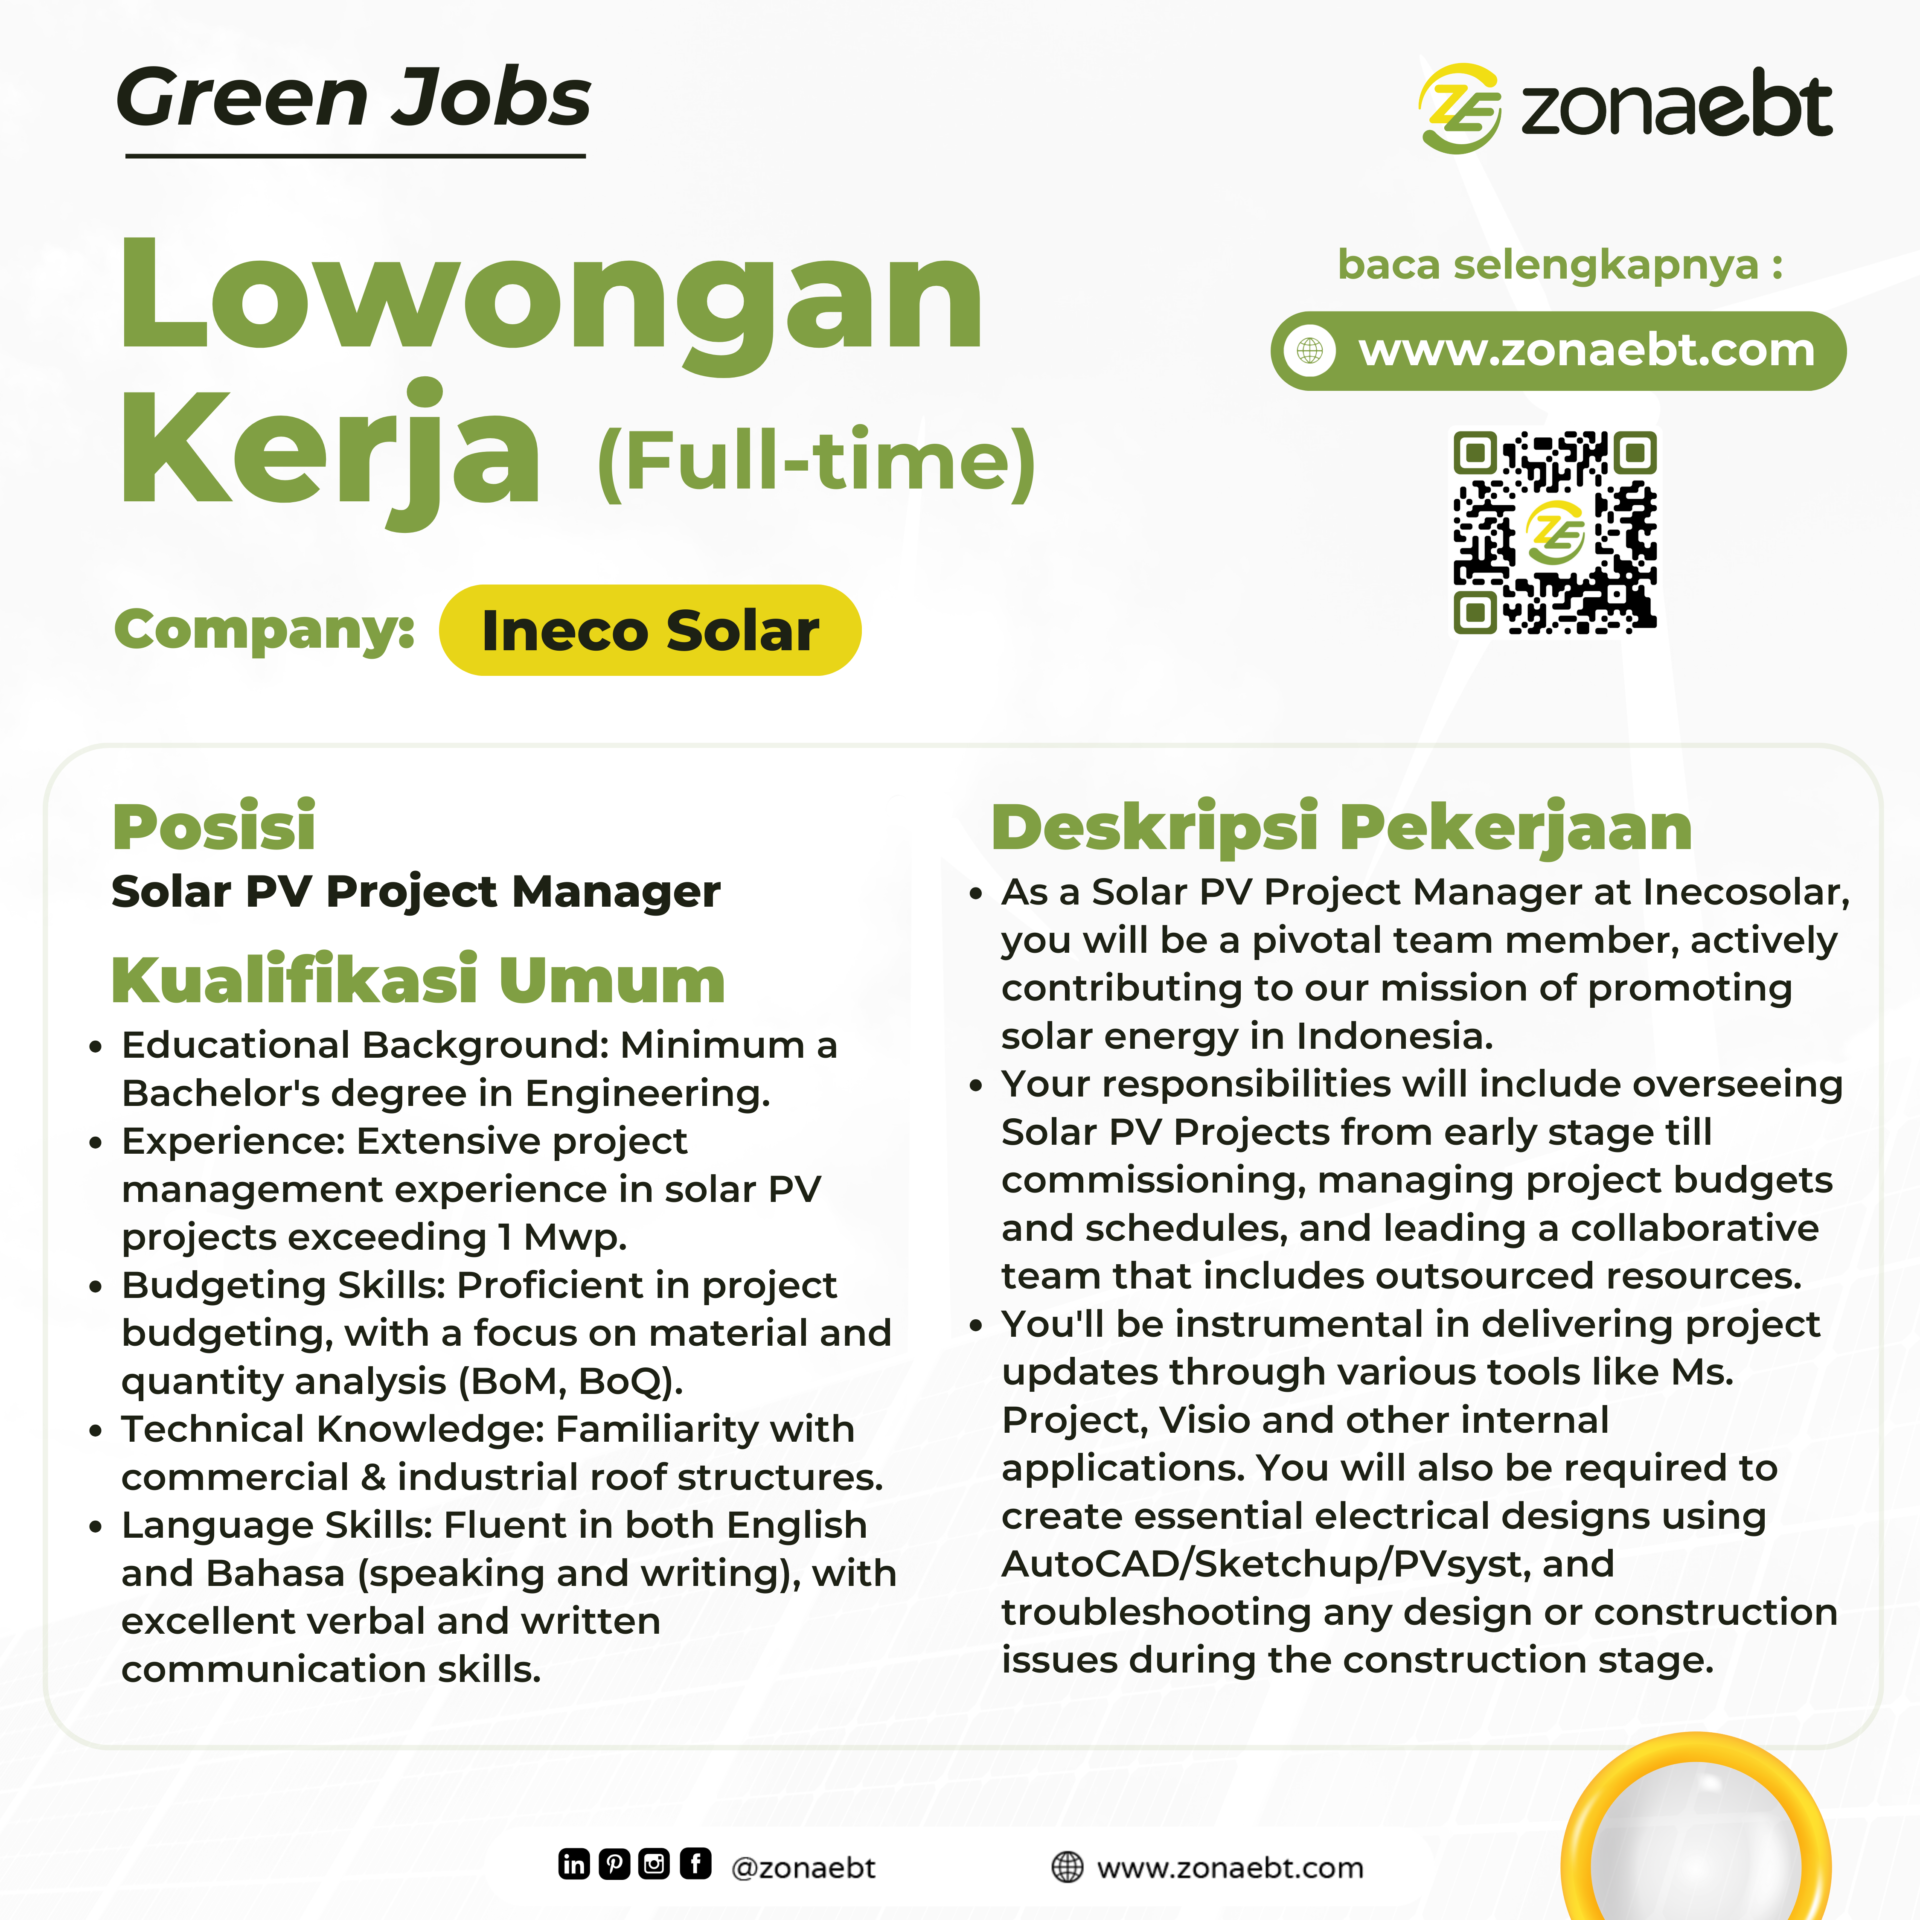 Post Solar PV Project Manager greenjobs zonaebt.com